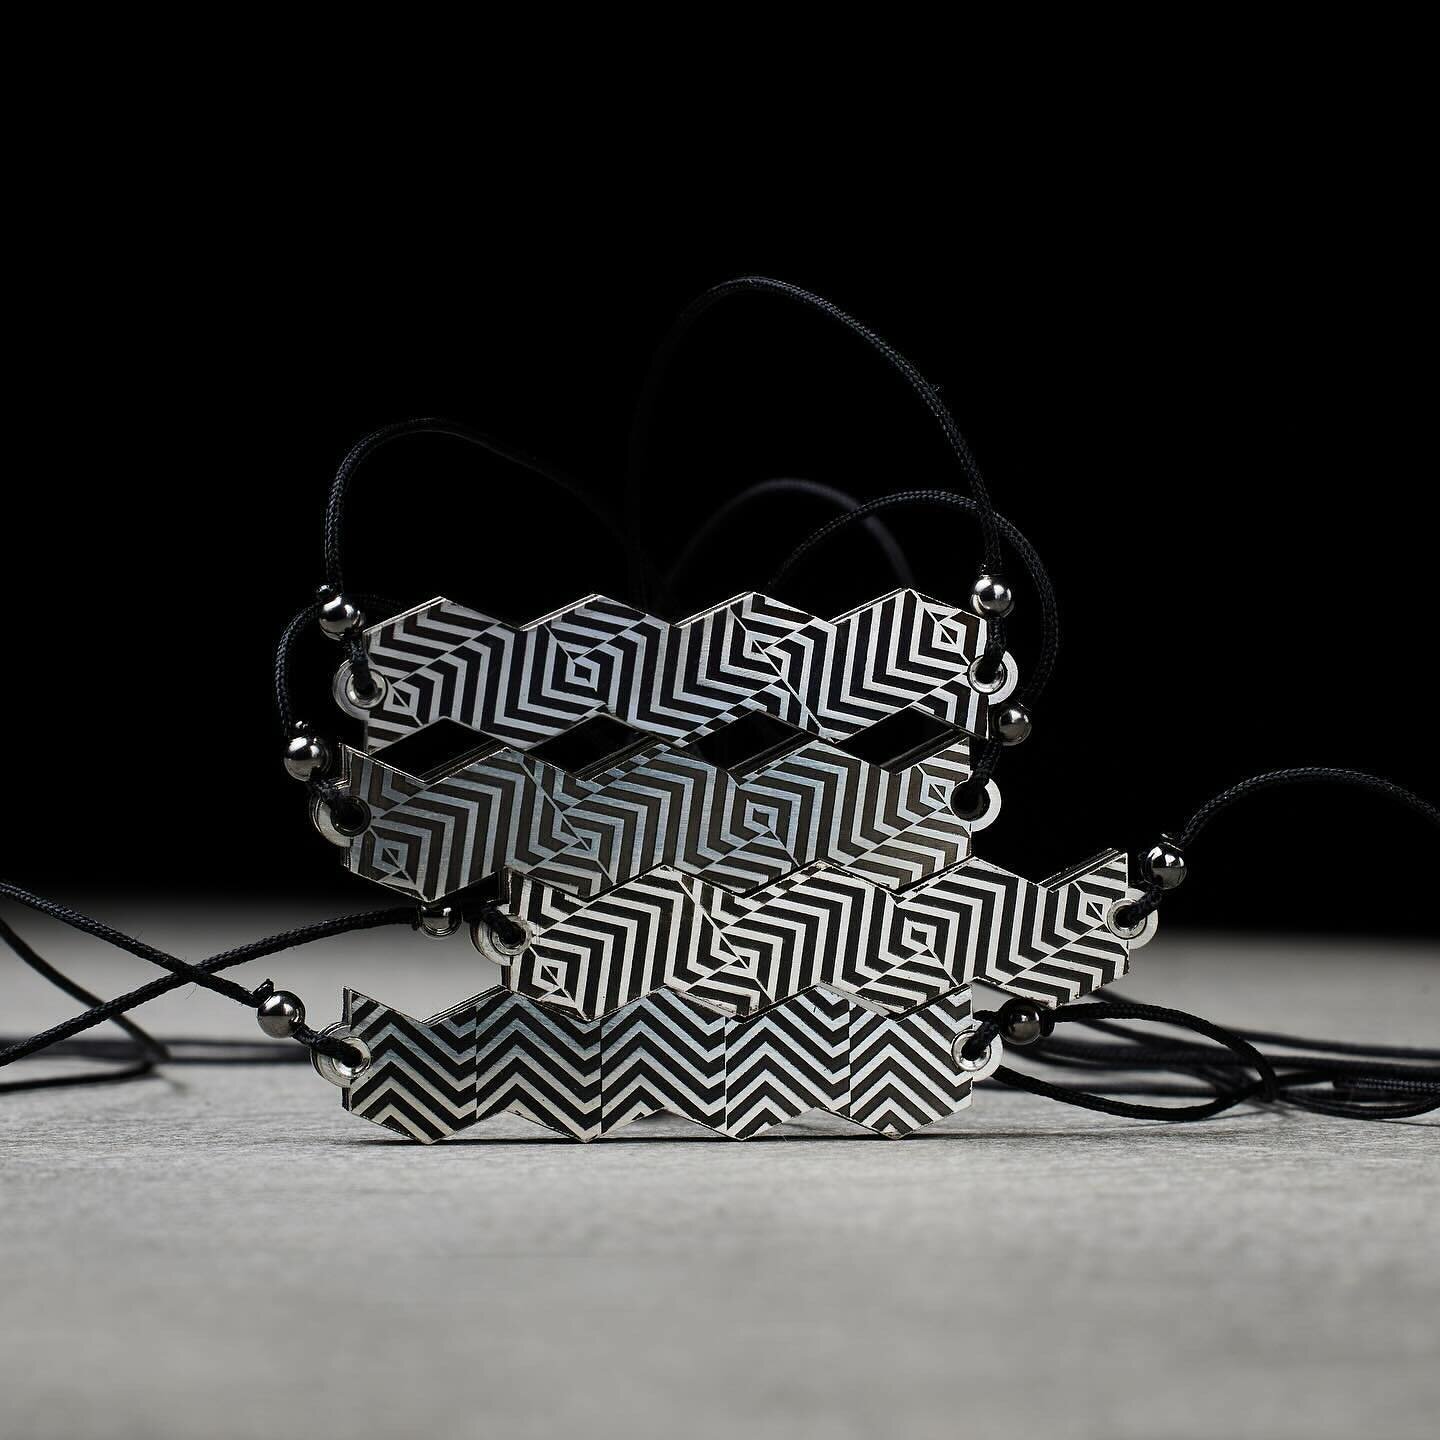 LISTEN,
silver pendants (8mmx40mm)

Their faces are engraved with zebra-like dazzle camouflage patterns, of the type first used in the First World War to protect ships from torpedo attacks. The idea was not to conceal the target, as a battleship grey